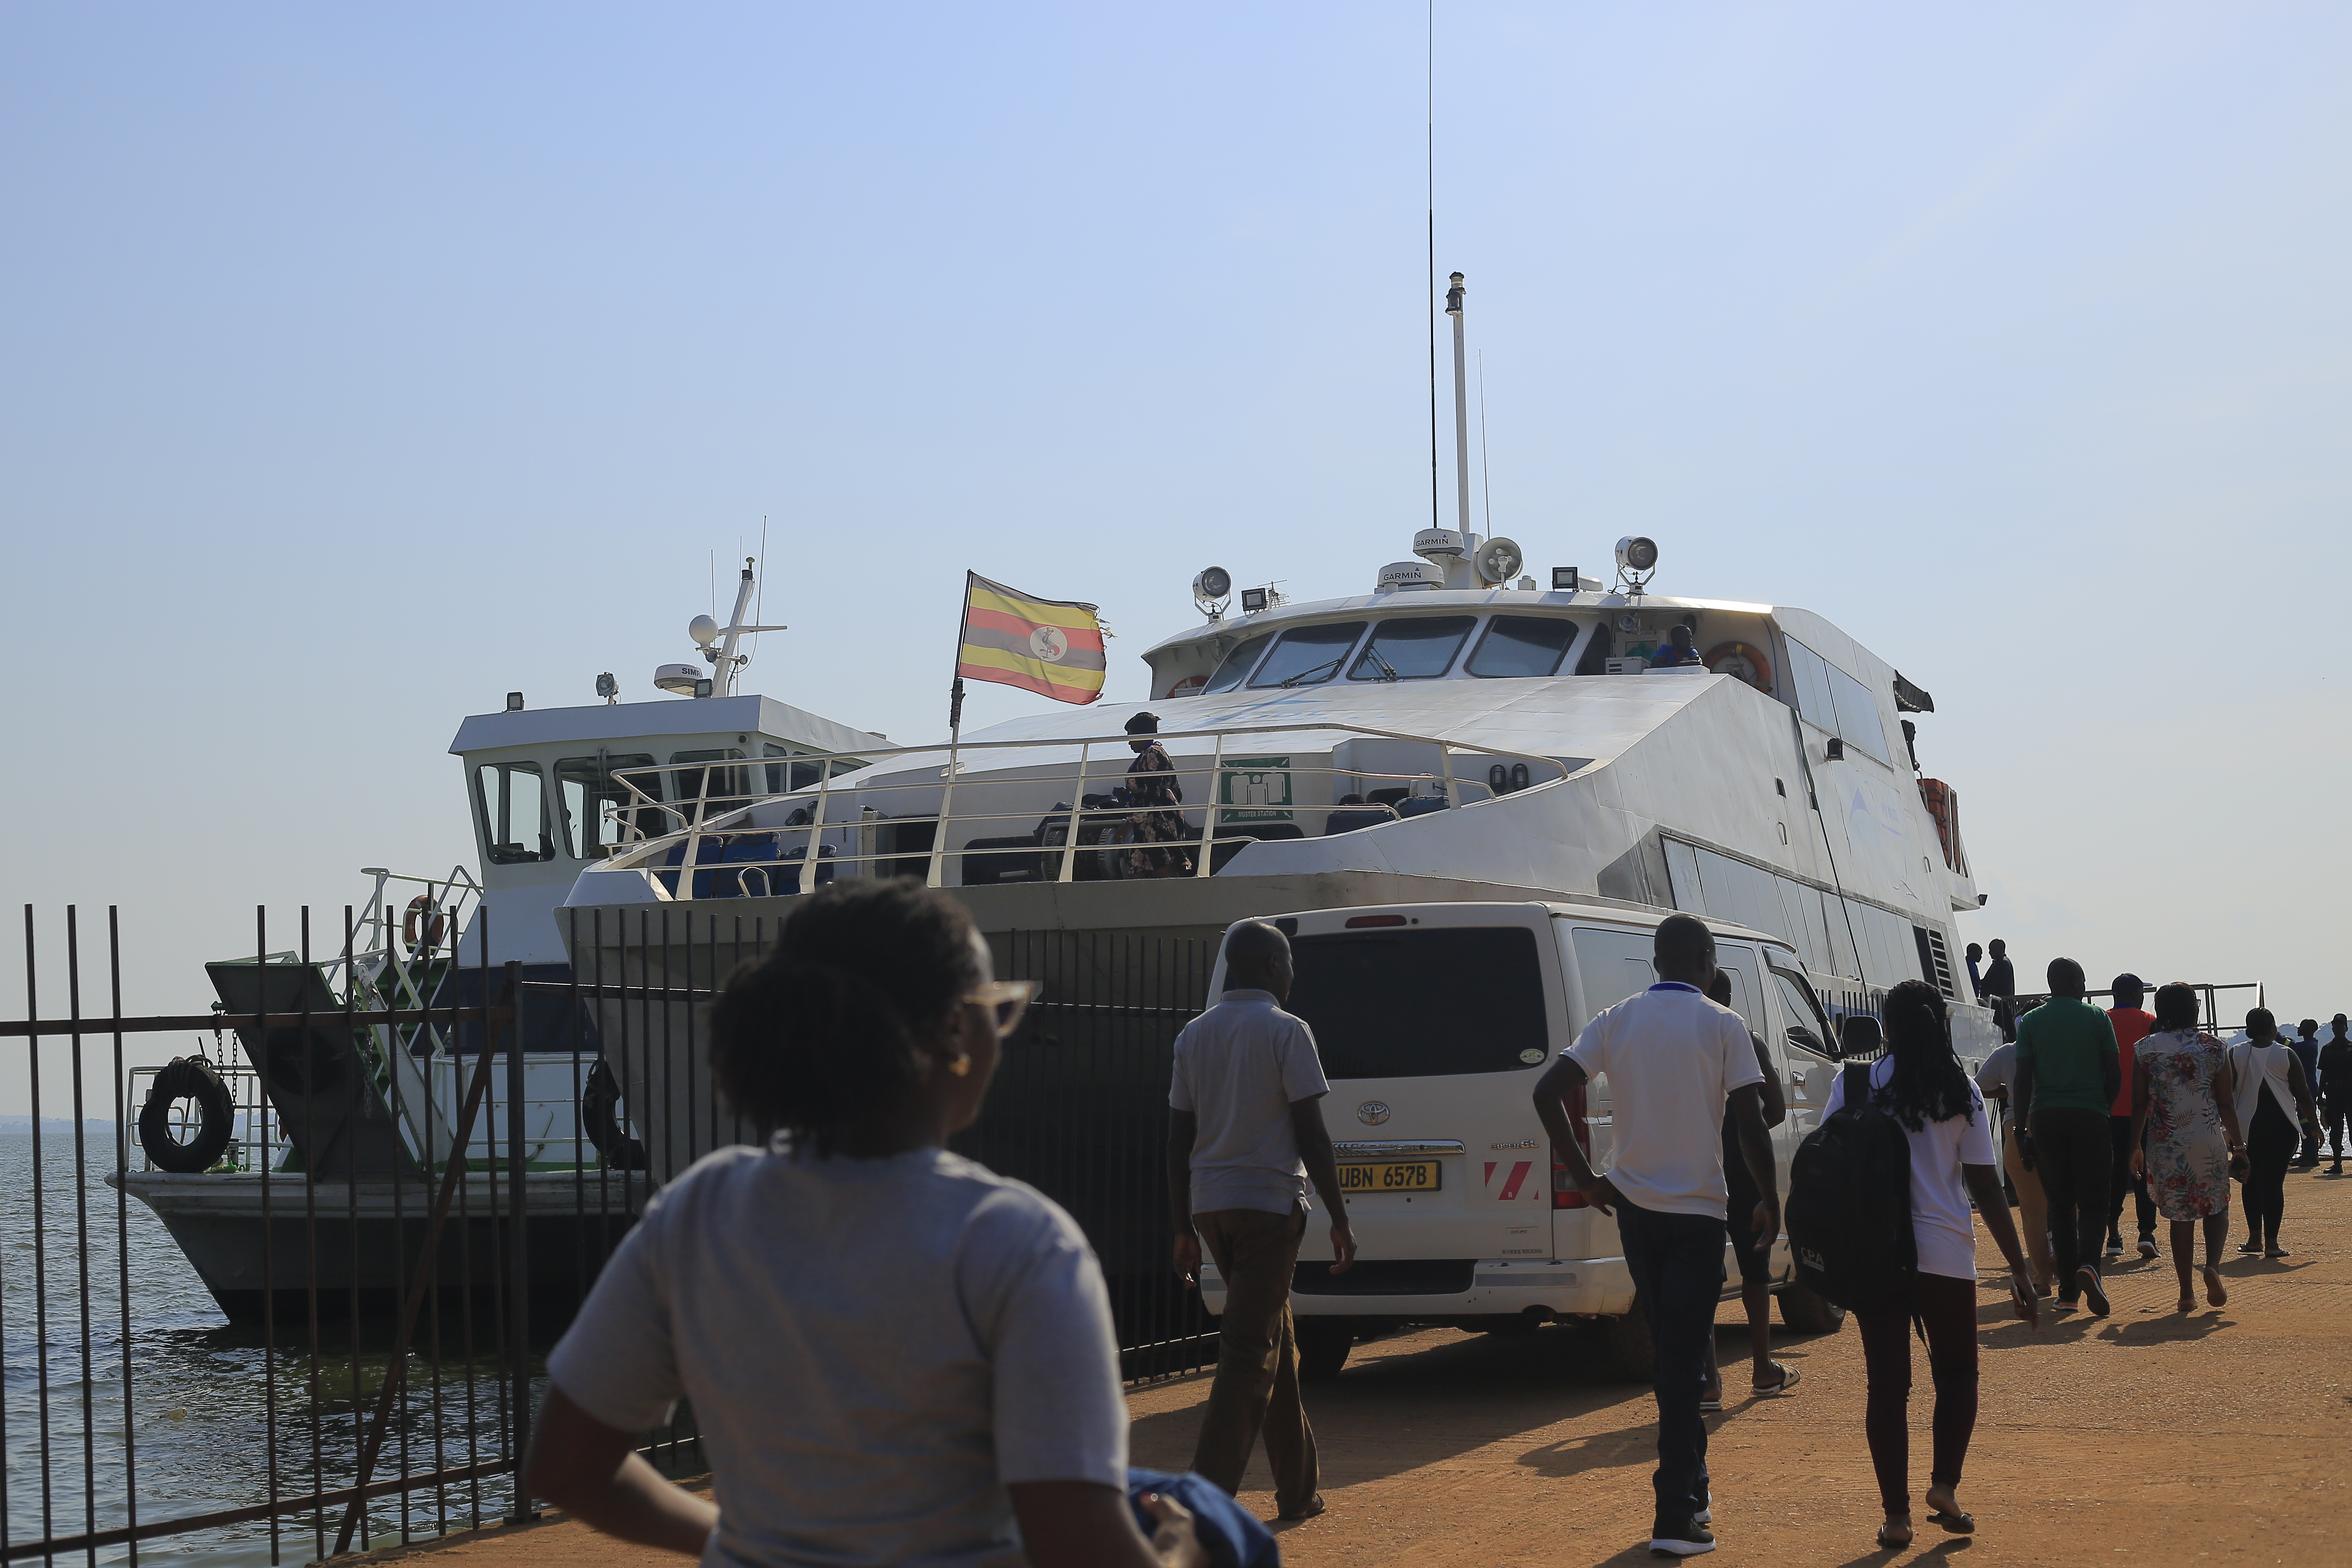 Participants onboarding the ship for joy sailing in Entebbe.